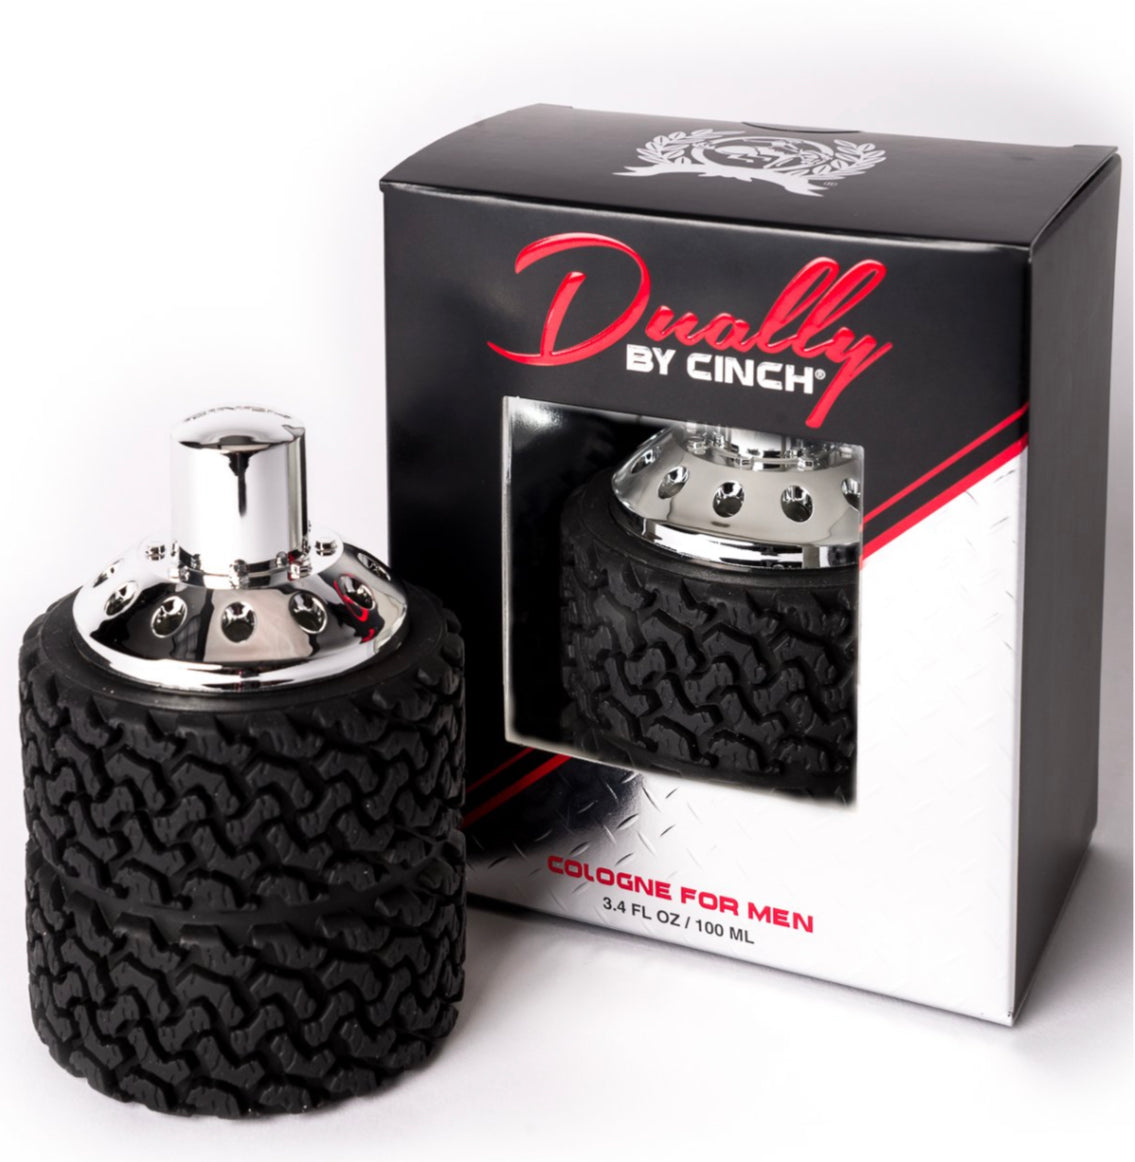 CINCH DUALLY COLOGNE